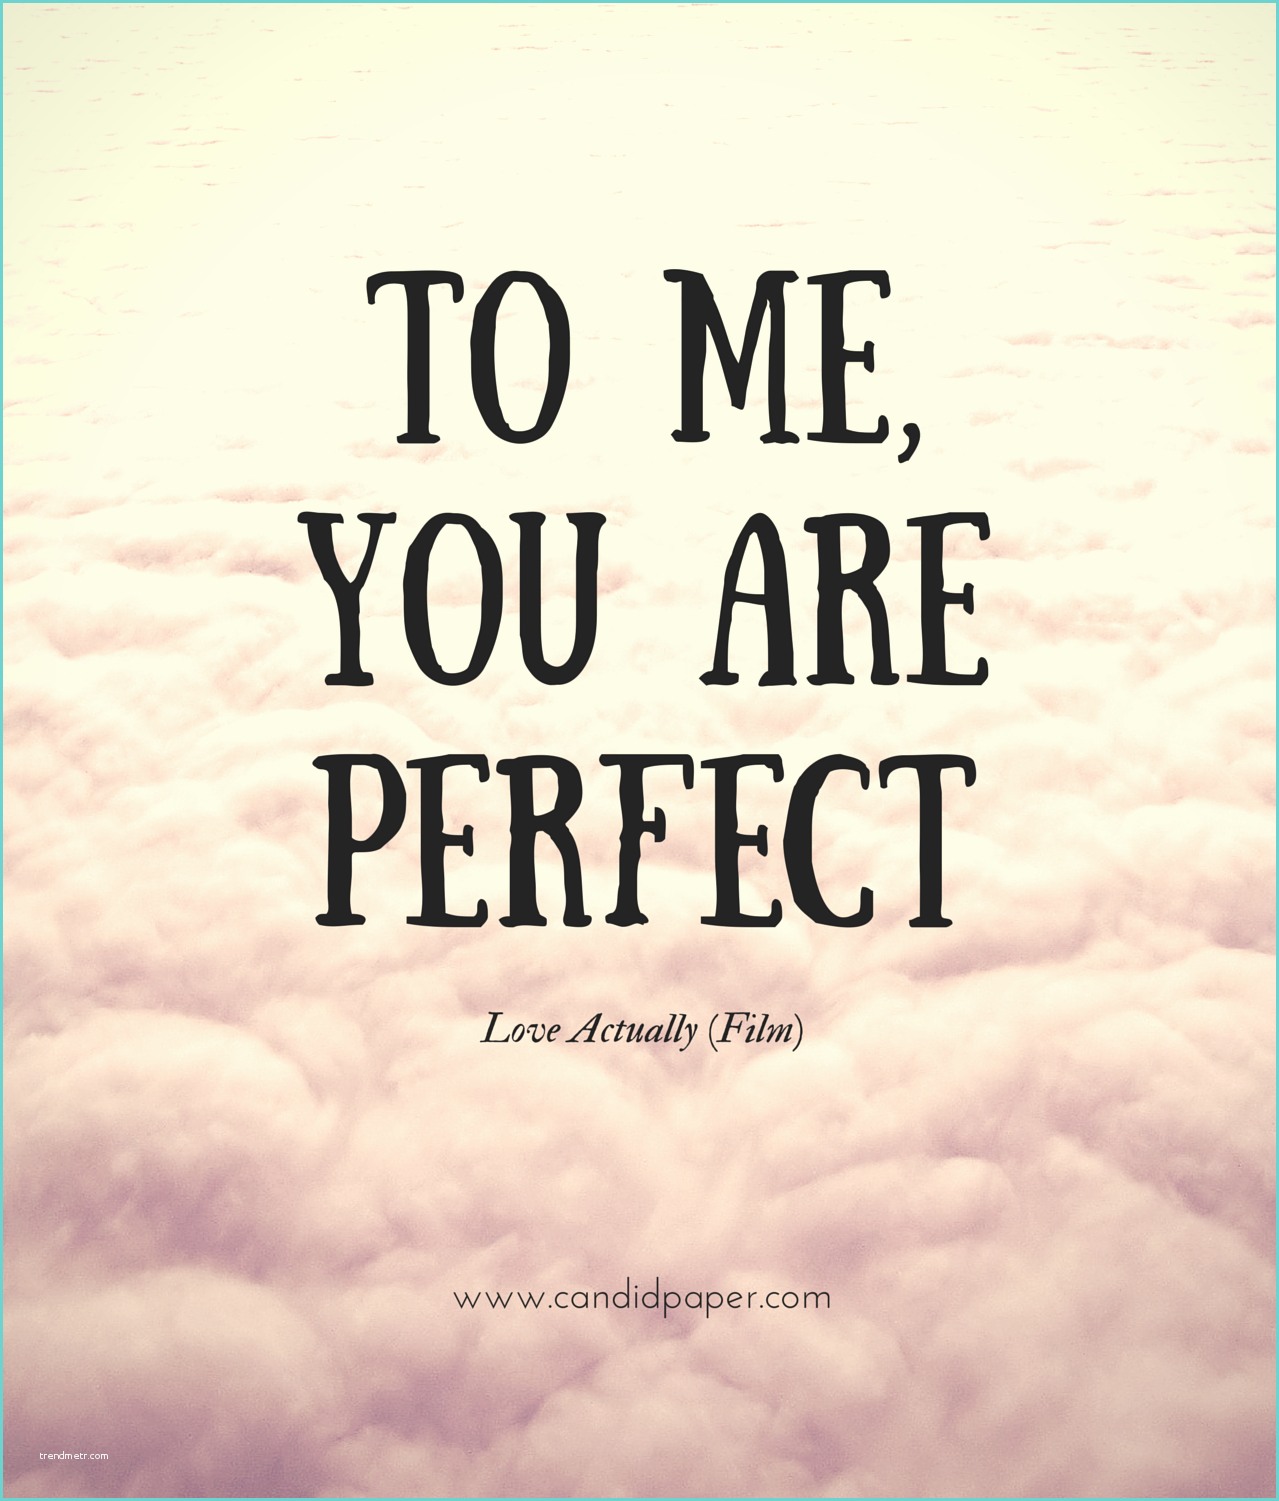 To Me You are Perfect Traduction to Me You are Perfect